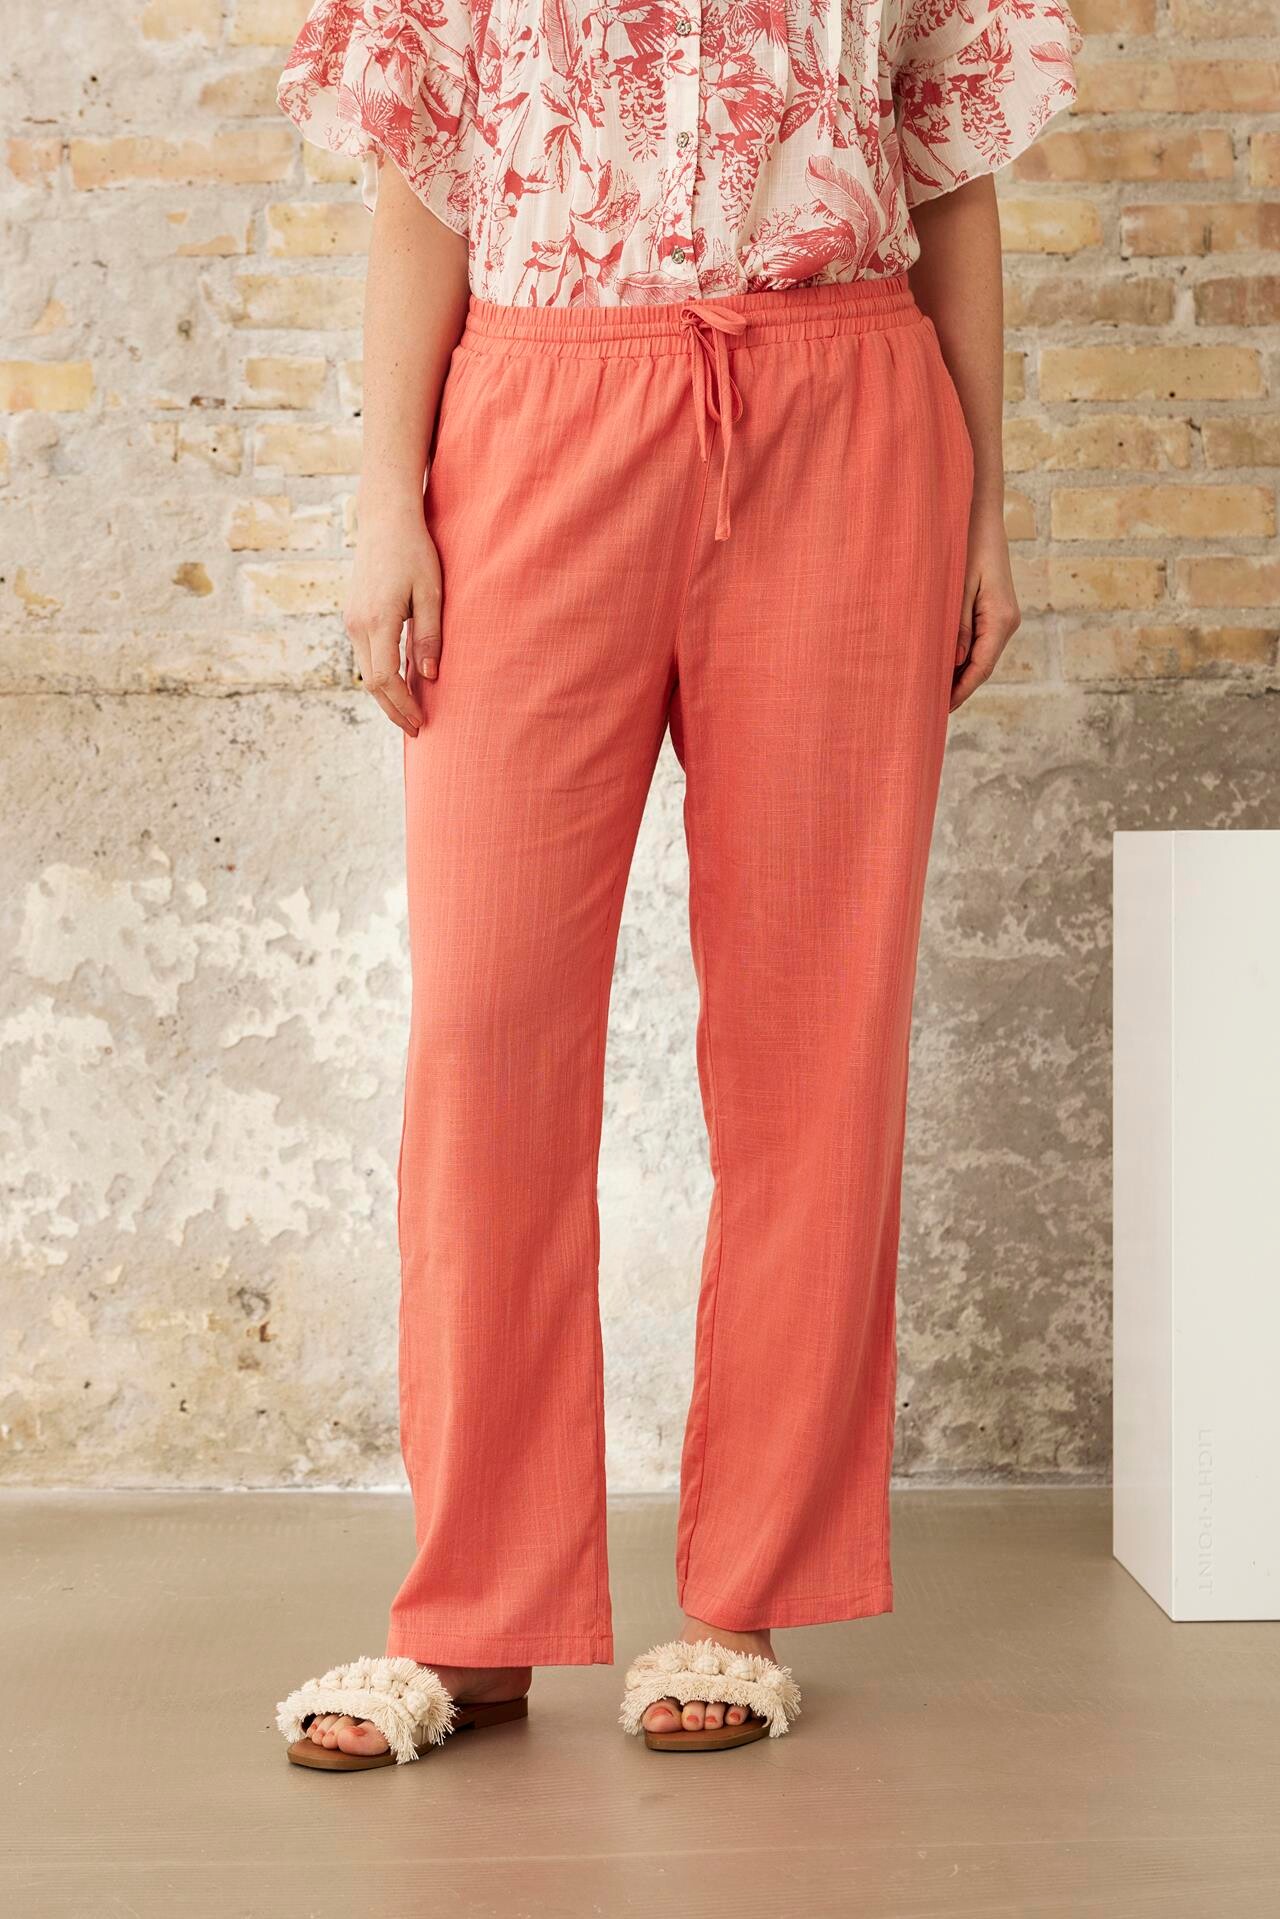 IN FRONT EVE PANTS 16220 420 (Coral 420)